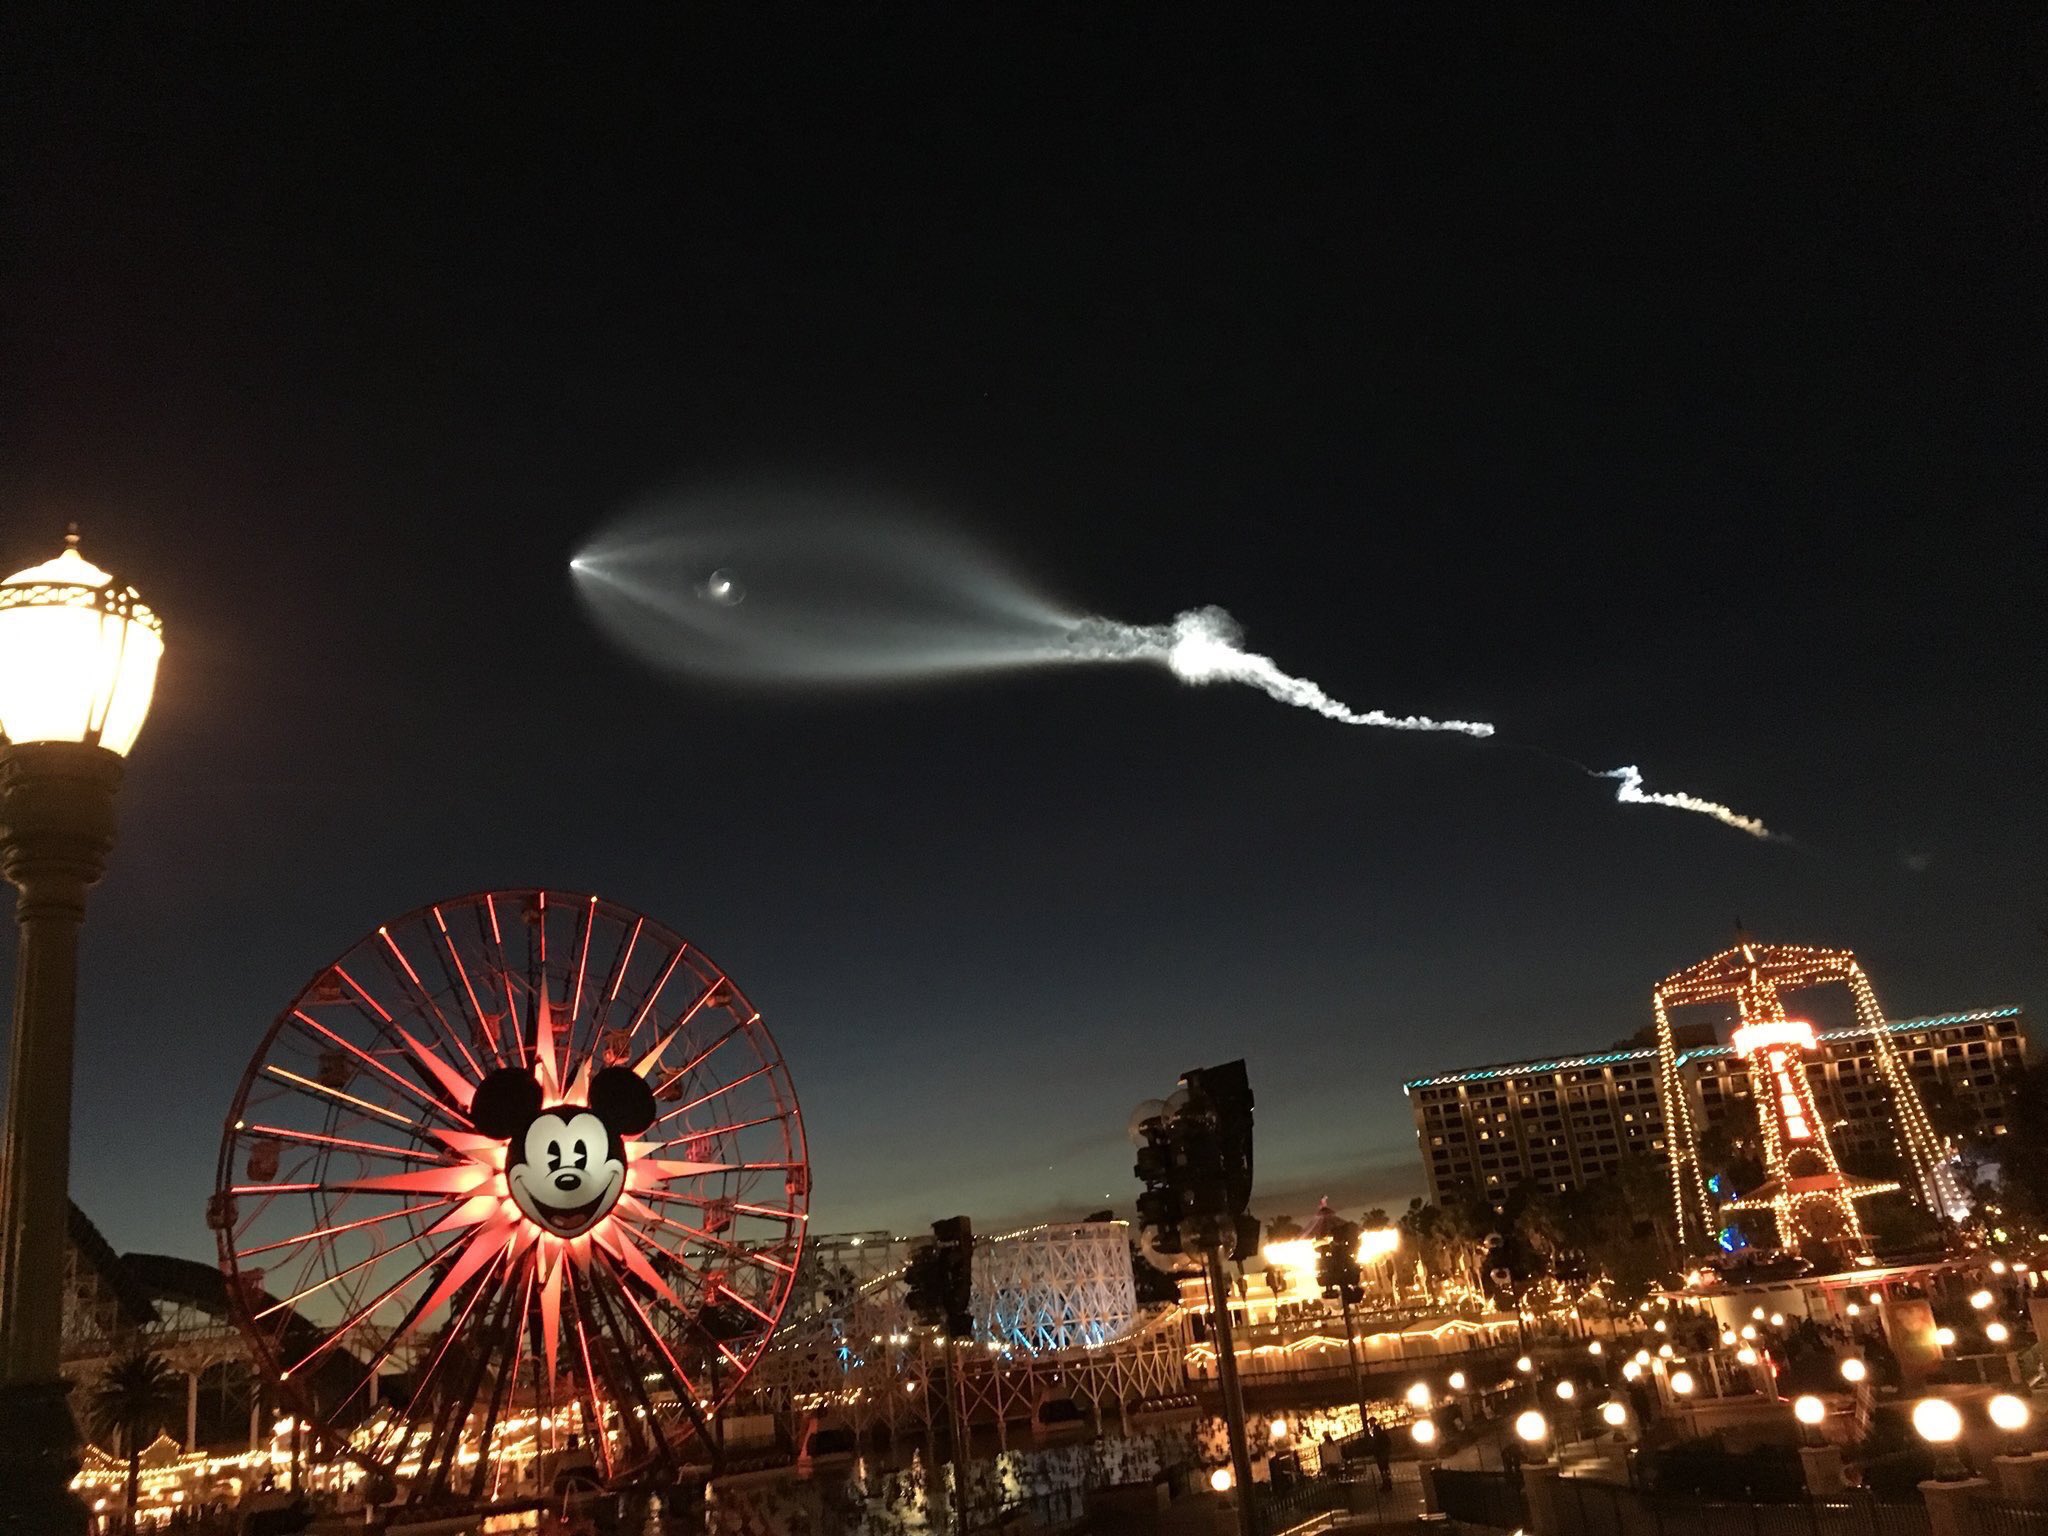 SpaceX Falcon 9 launch over DCA - Photo by: @mhmtkcn